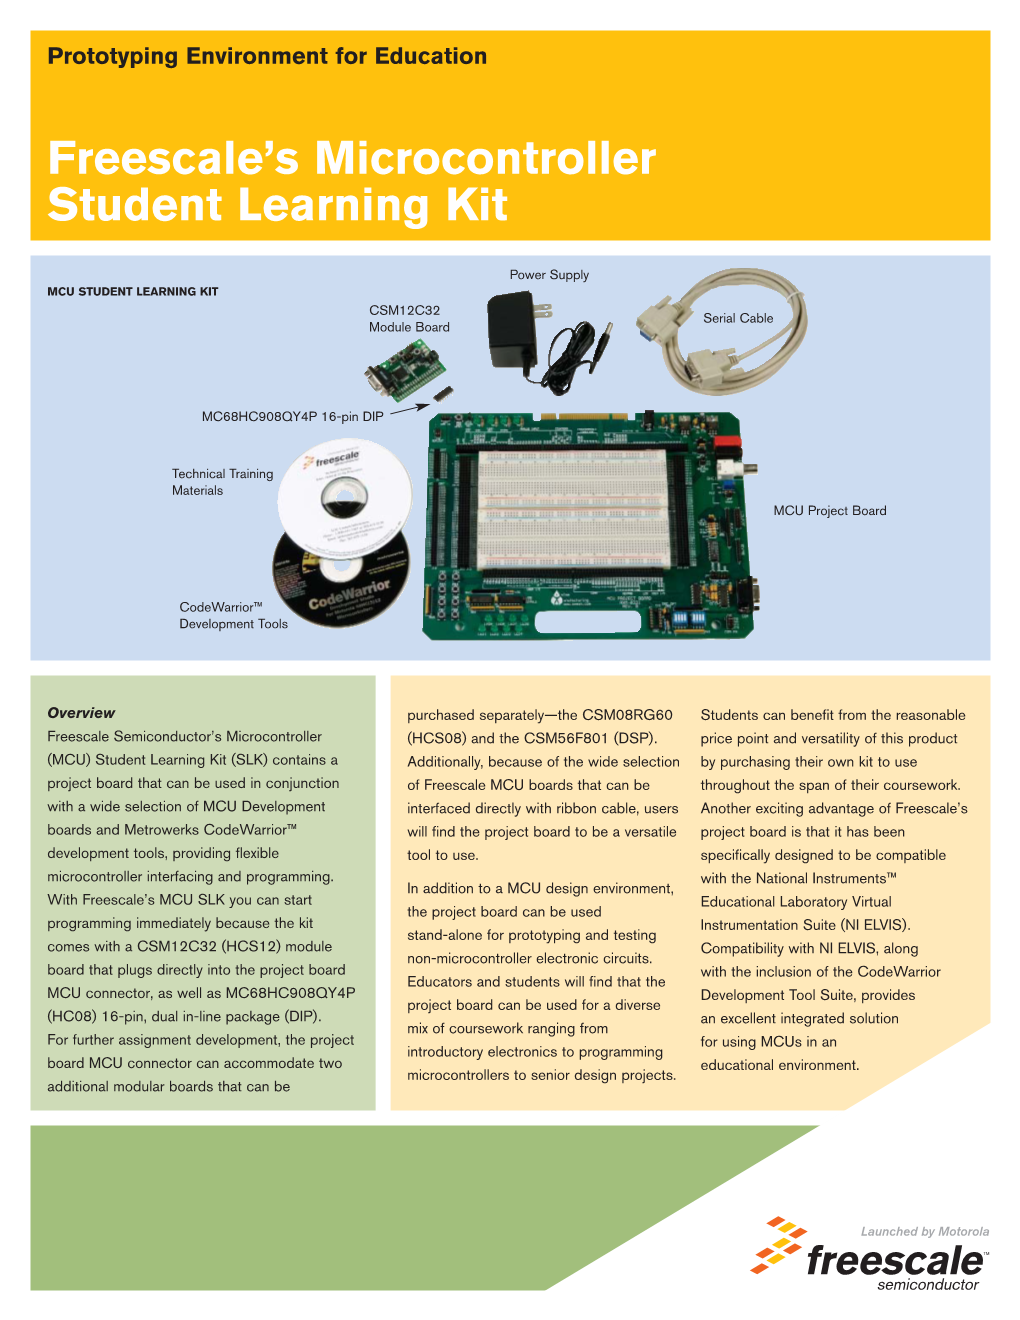 Freescale's Microcontroller Student Learning